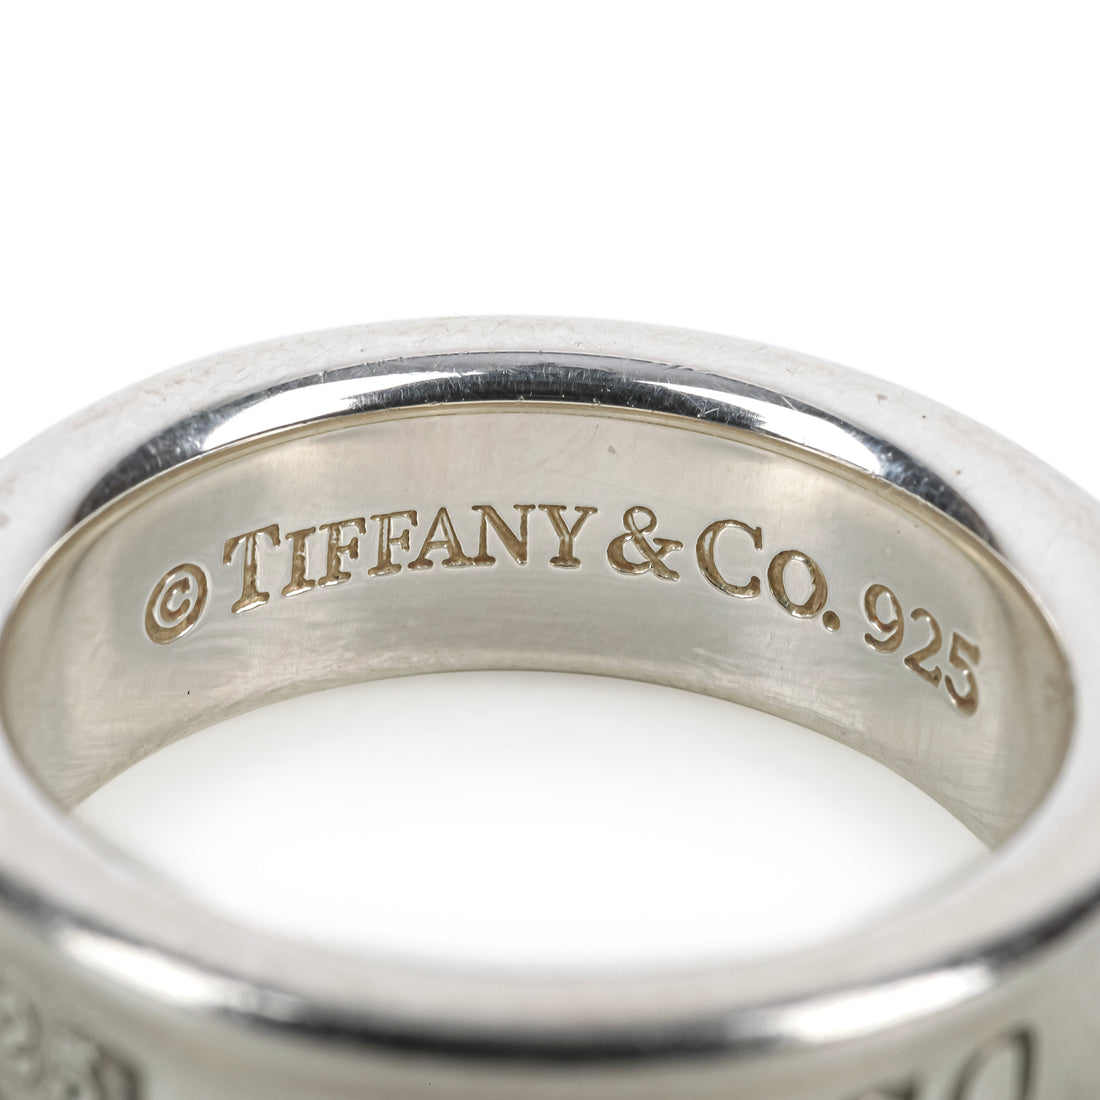 TIFFANY & CO. Sterling Silver 1837 Band Ring